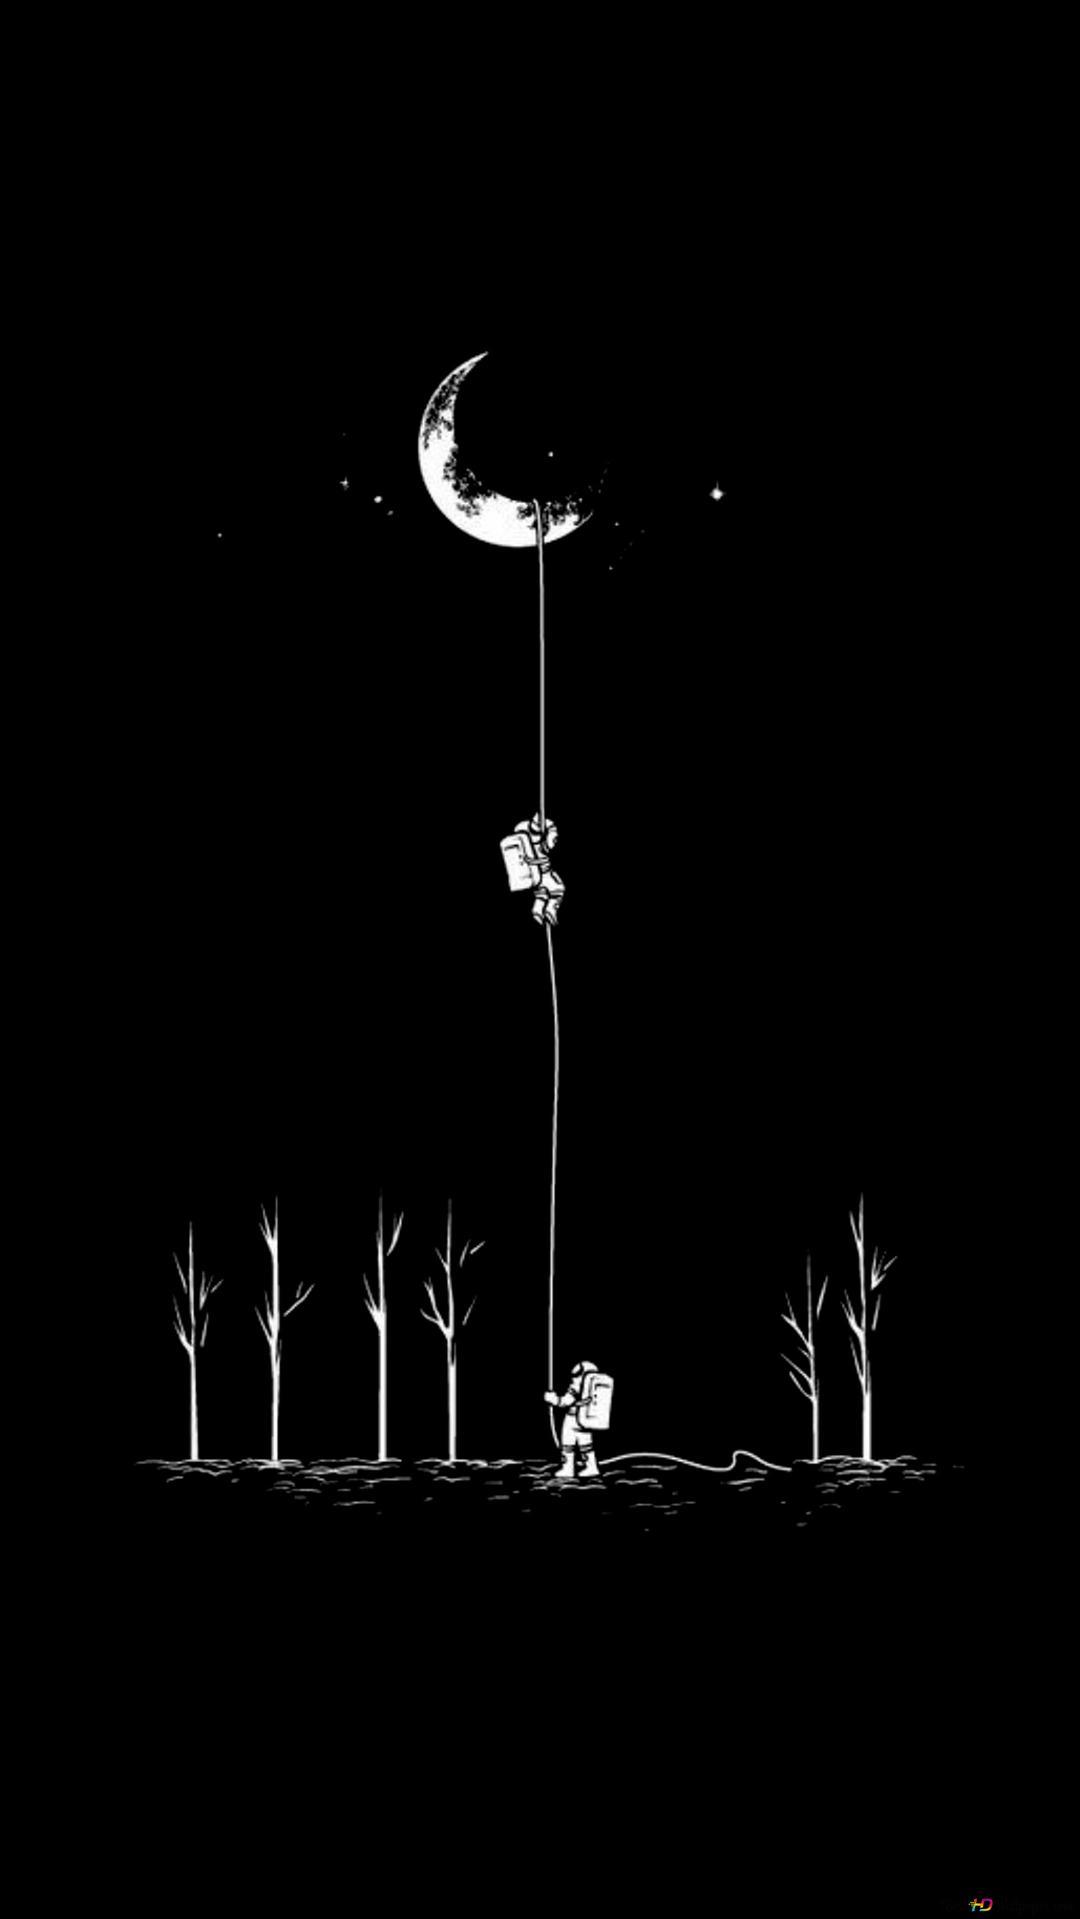 Black And White Anime Drawing Of Astronauts Climbing Half Moon On